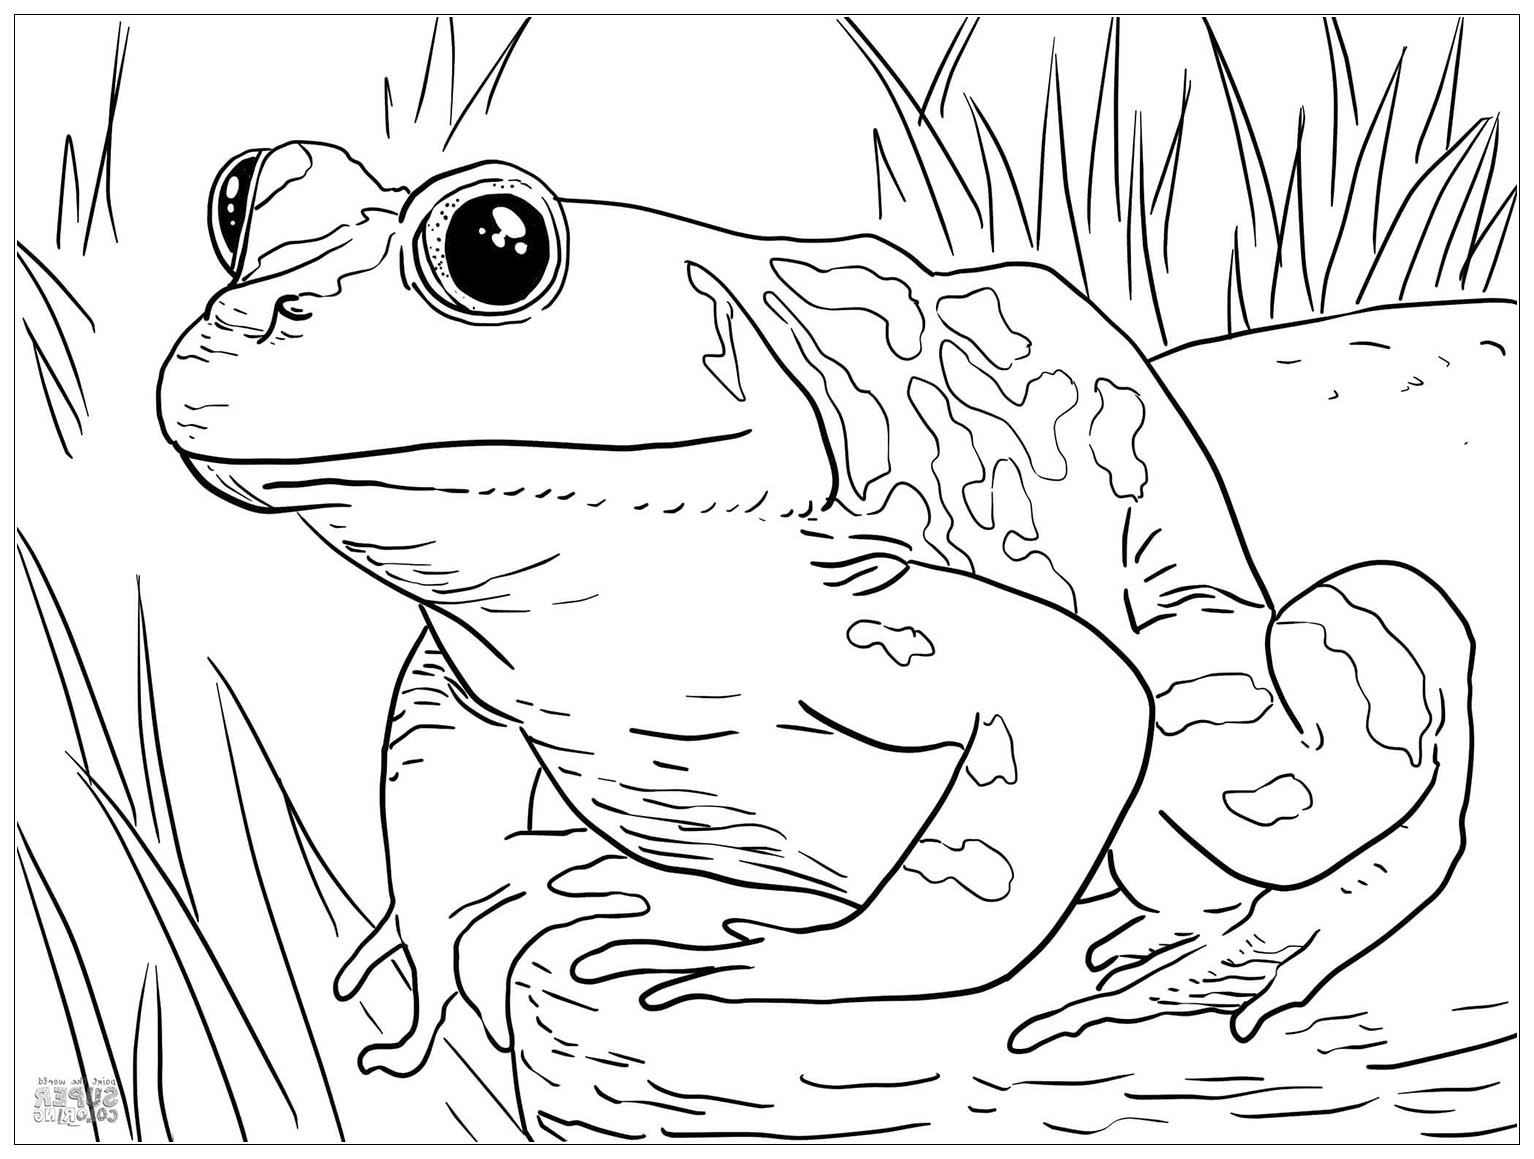 Frogs to download for free - Frogs Kids Coloring Pages